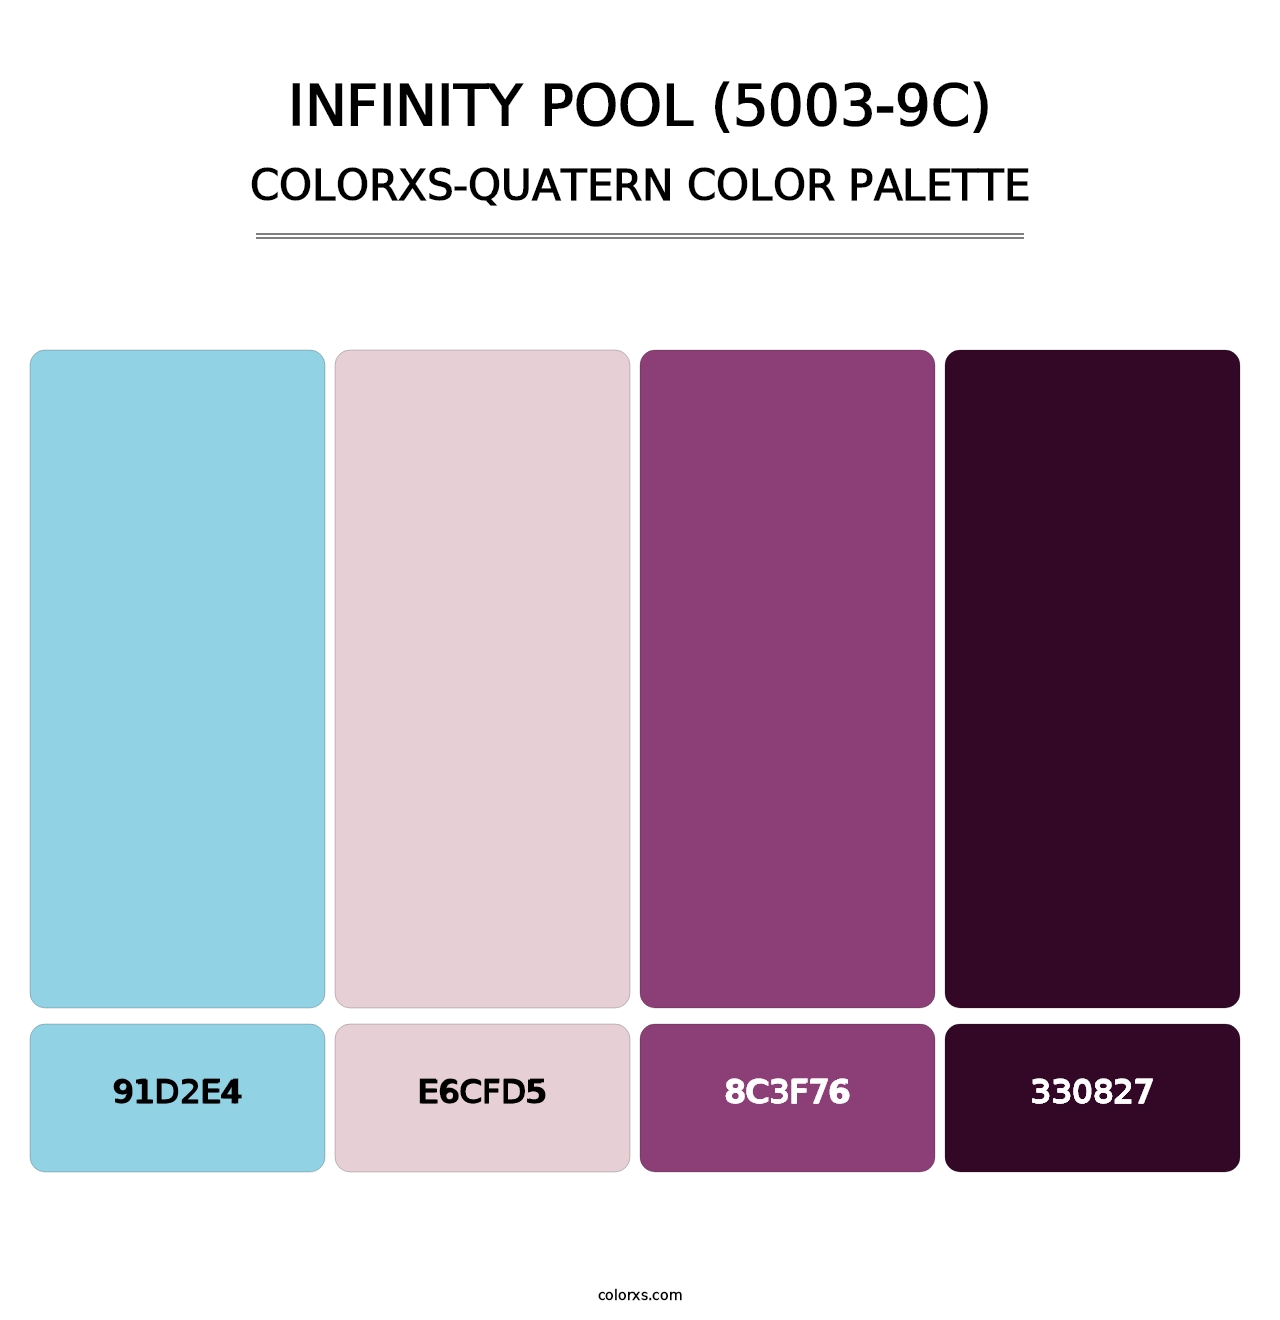 Infinity Pool (5003-9C) - Colorxs Quatern Palette